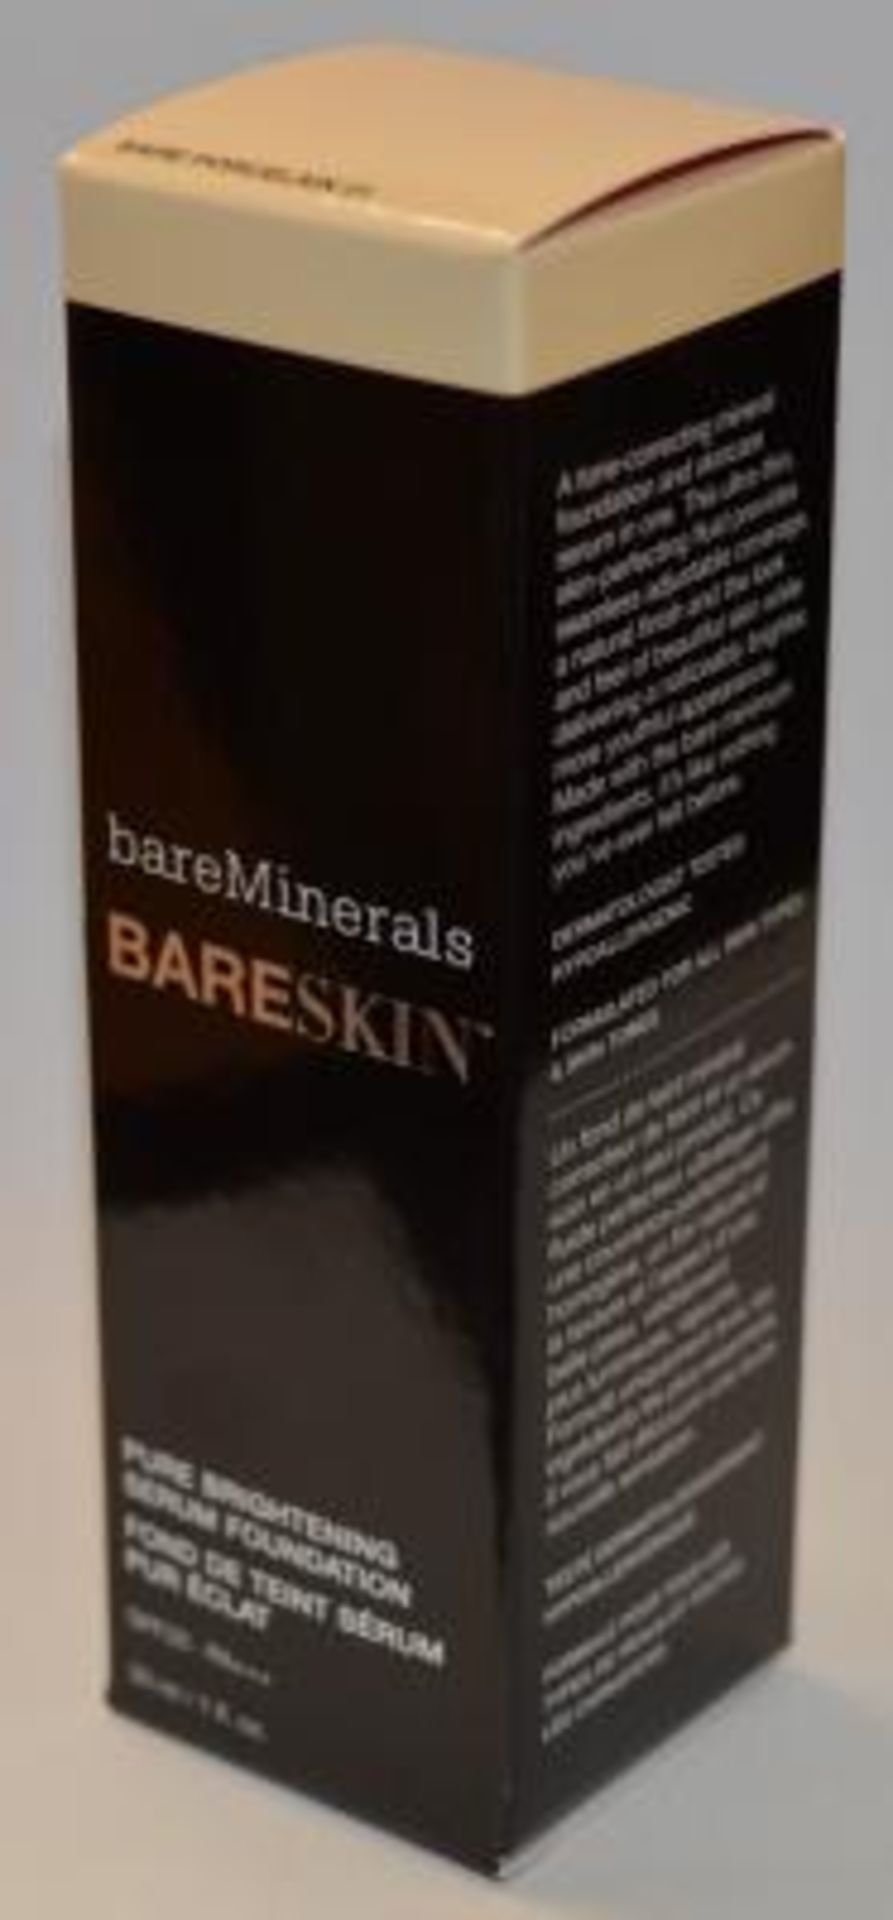 1 x Bare Escentuals bareMinerals “BARESKIN” Perfecting Face Brush - Genuine Product - Brand New - Image 13 of 14